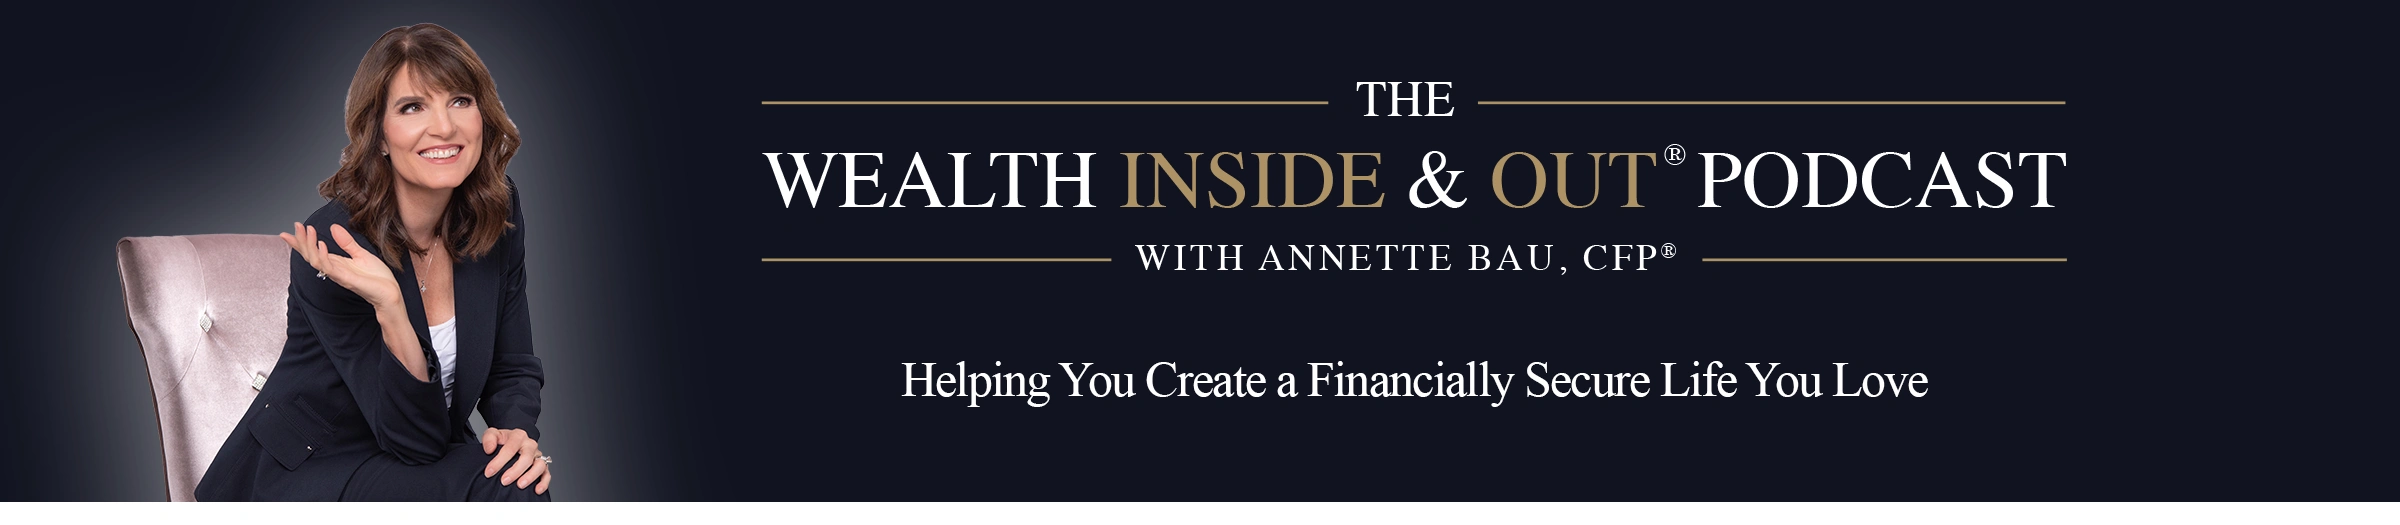 Wealth Inside and Out® Podcast Hero